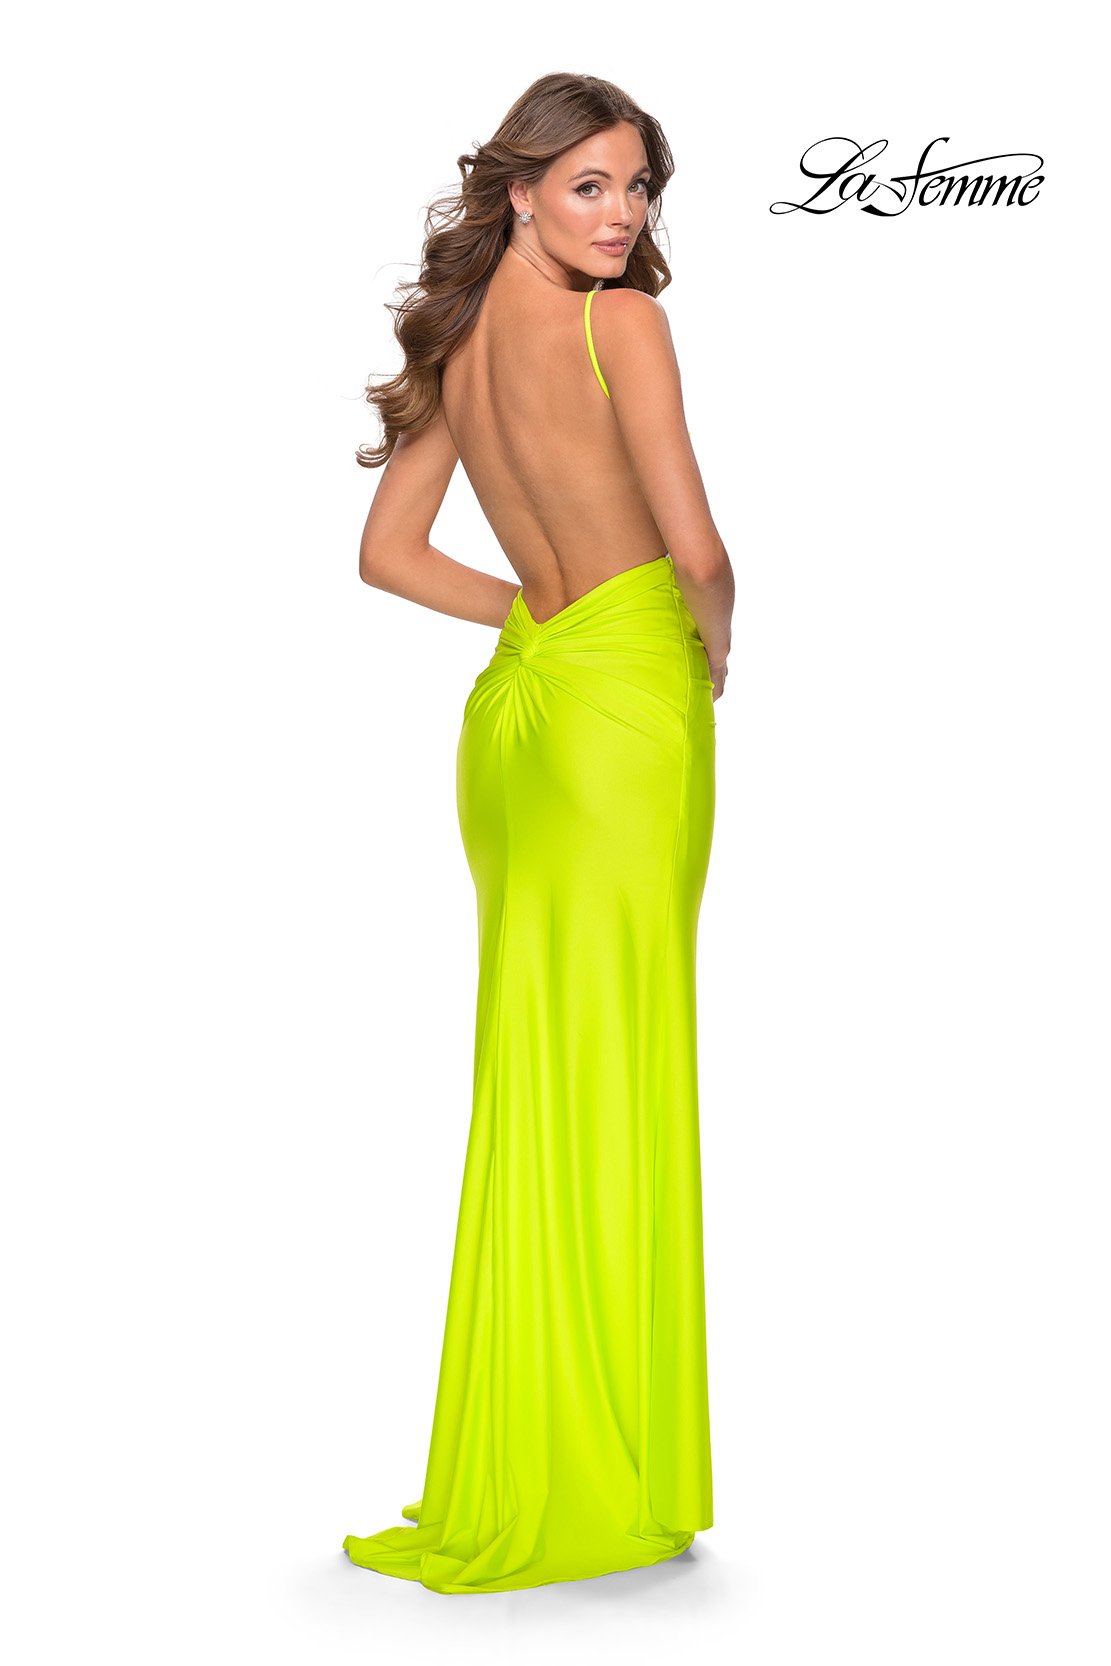 neon yellow gown